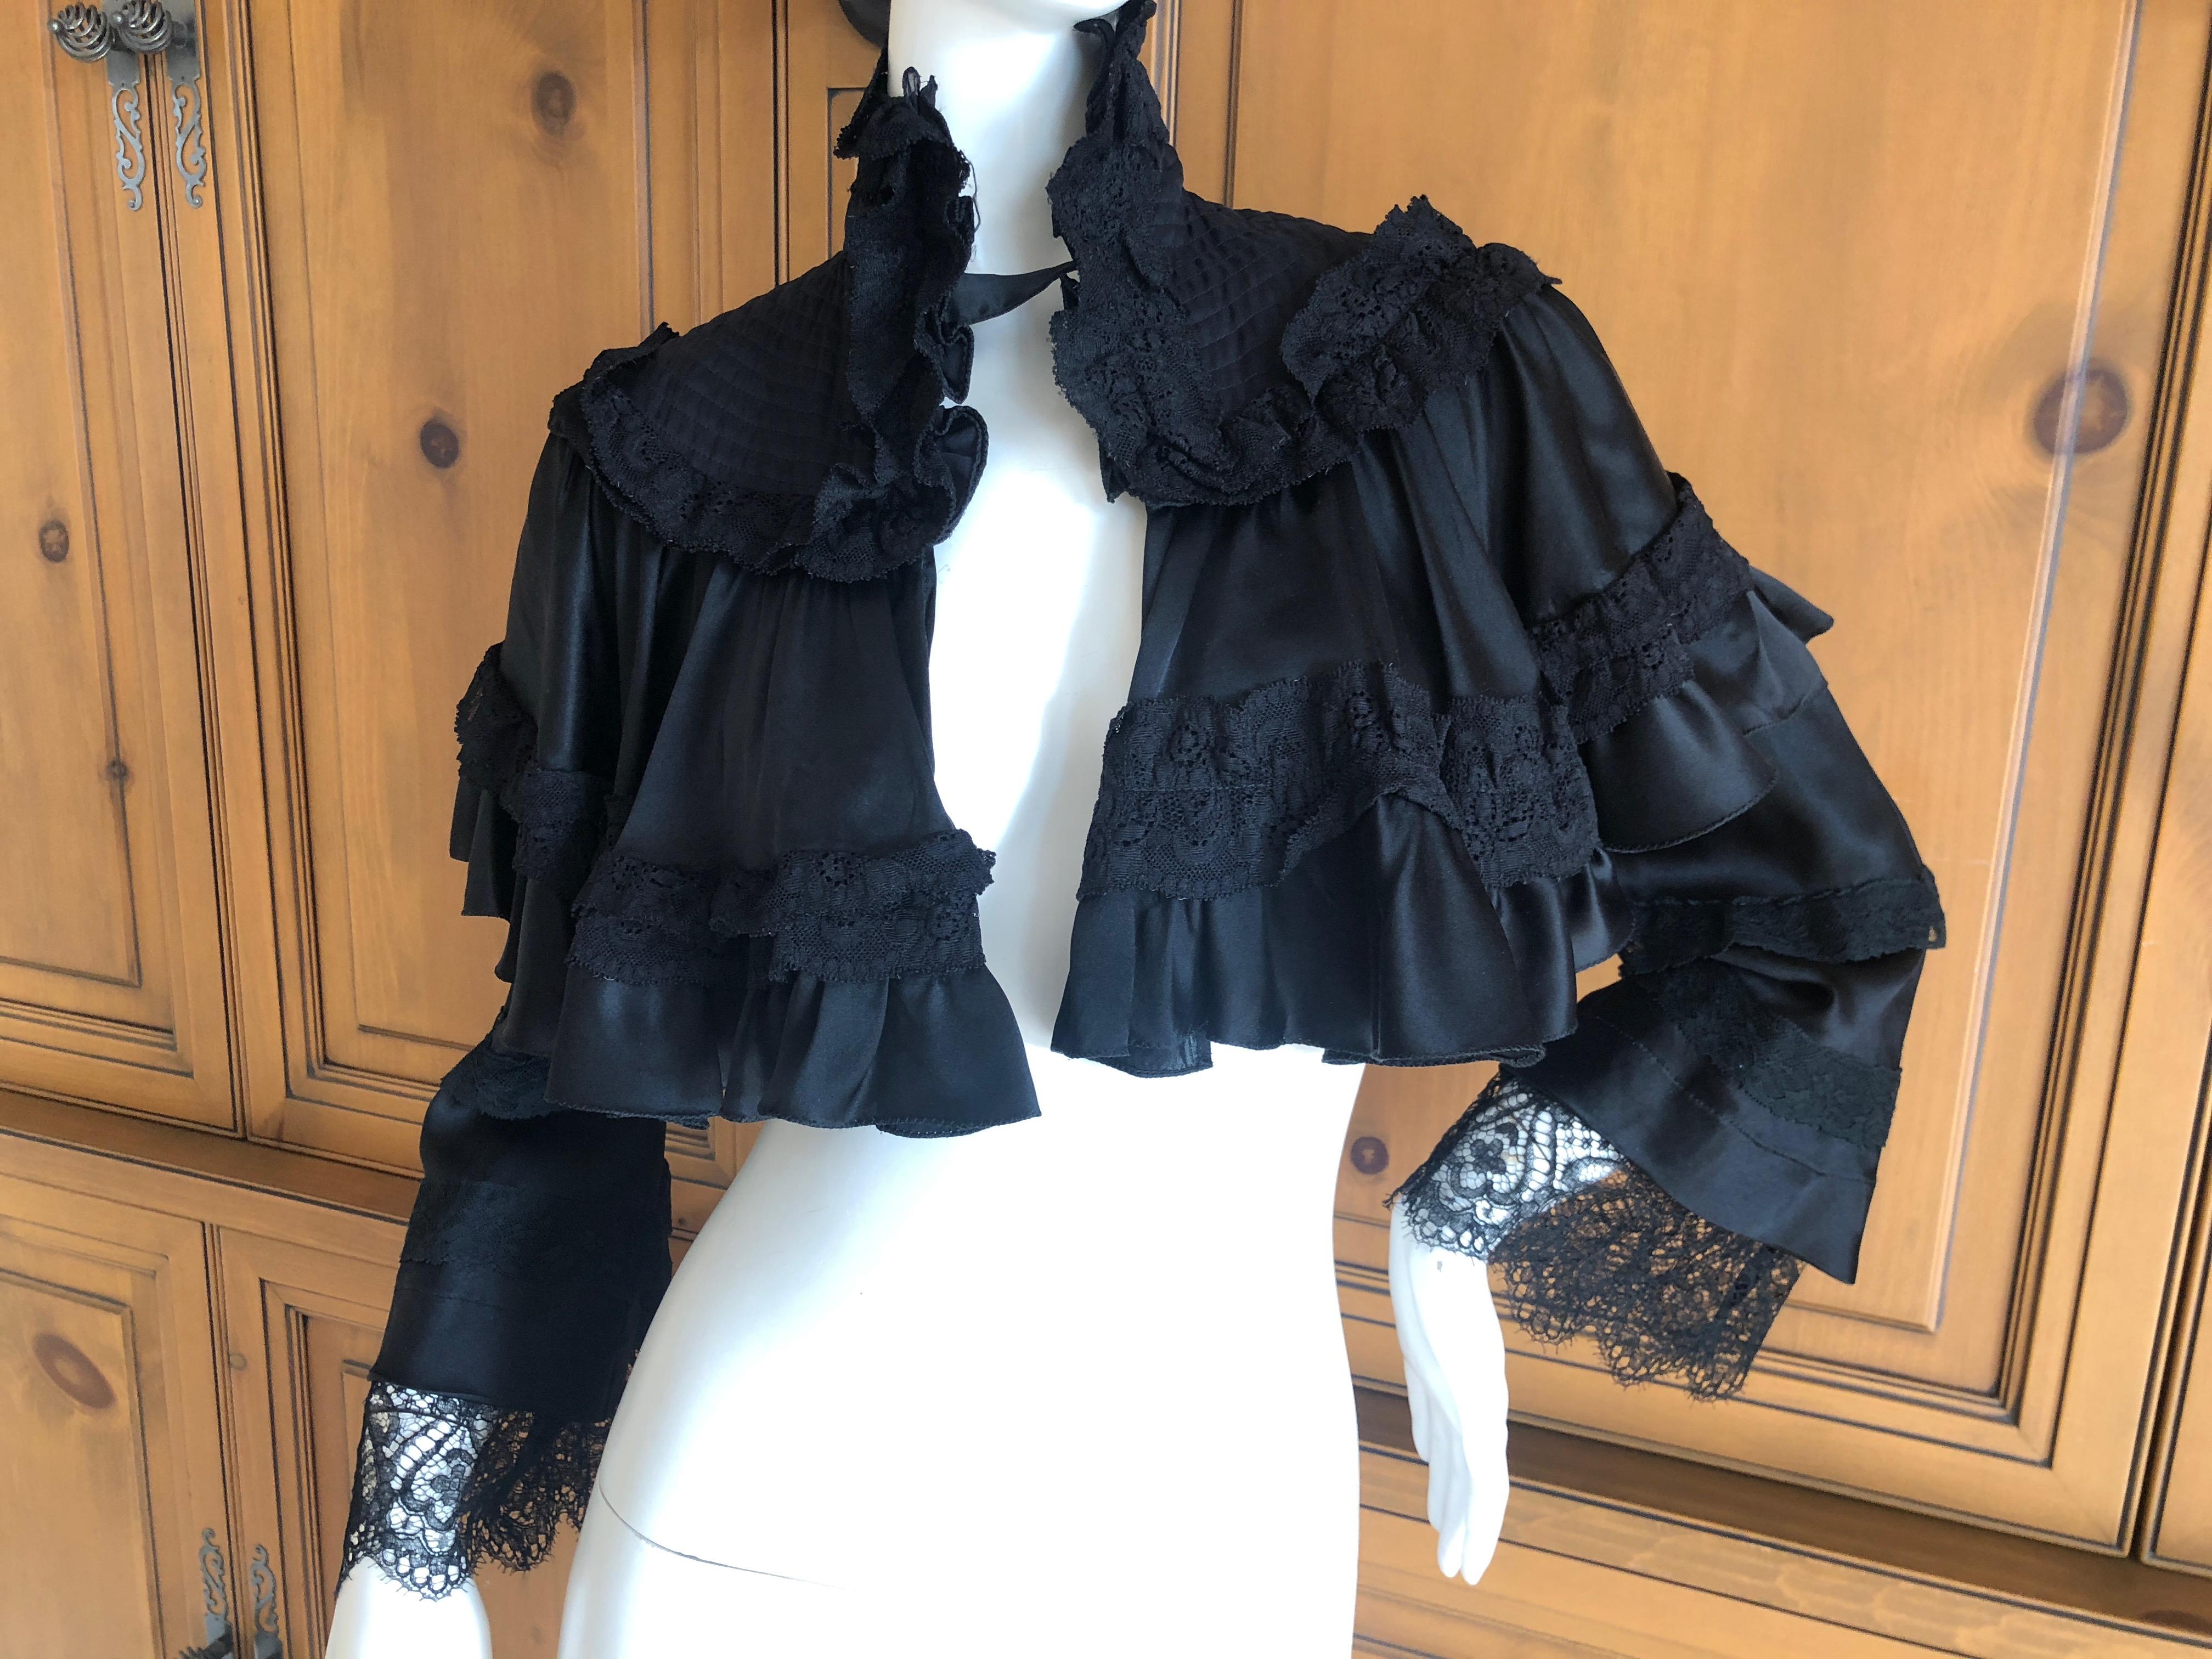 Roberto Cavalli for Just Cavalli Vintage Black Silk Victorian Style Cape Jacket In Excellent Condition For Sale In Cloverdale, CA